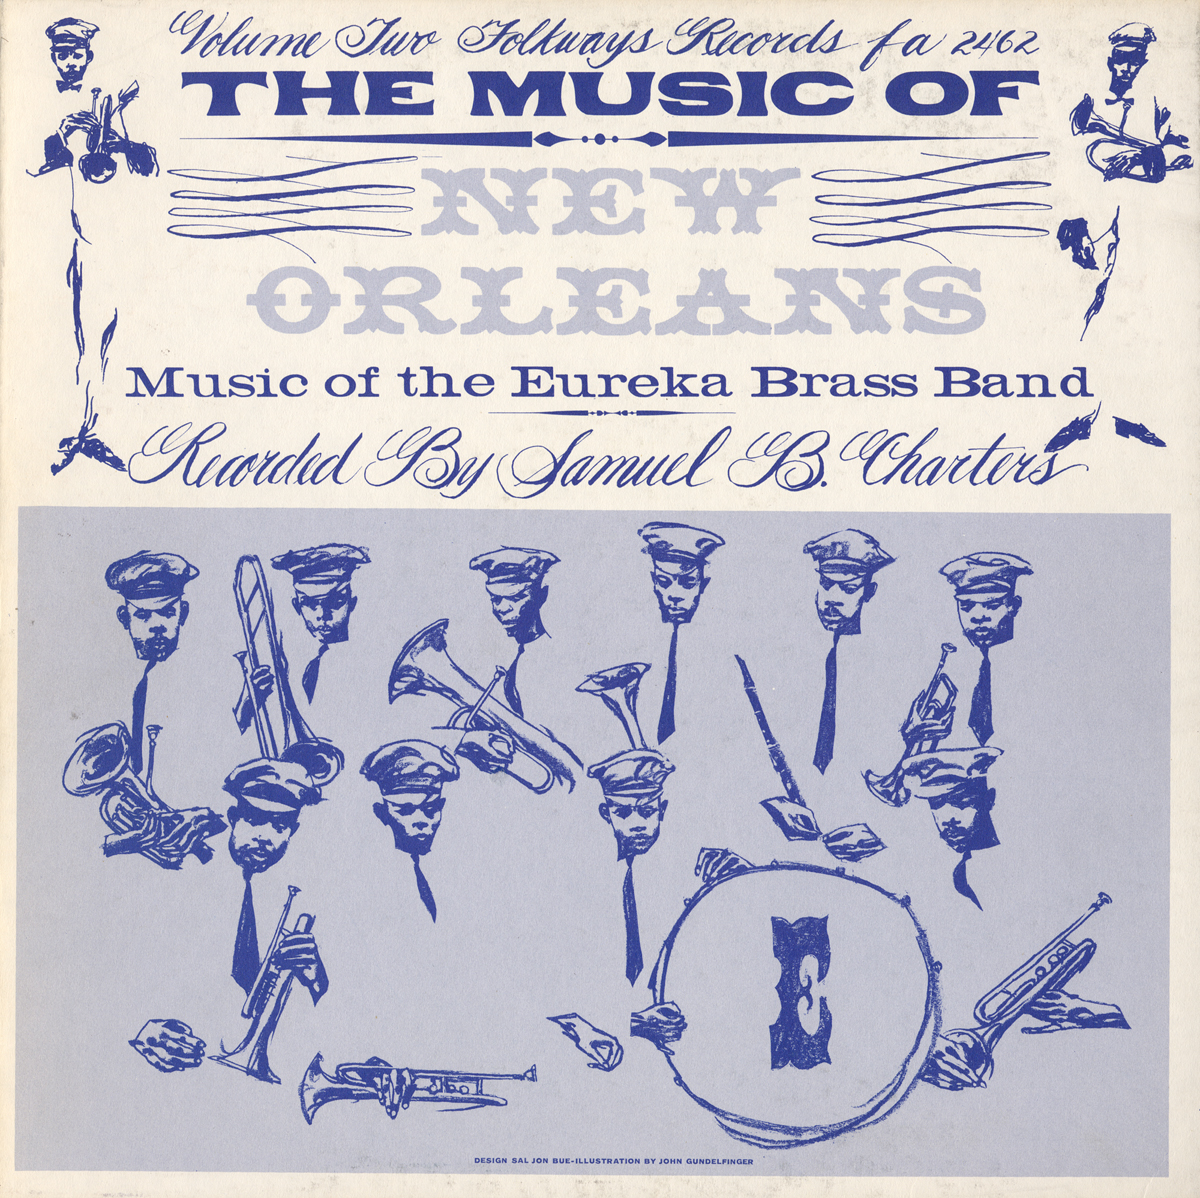 MUSIC OF NEW ORLEANS 2: MUSIC OF EUREKA BRASS BAND